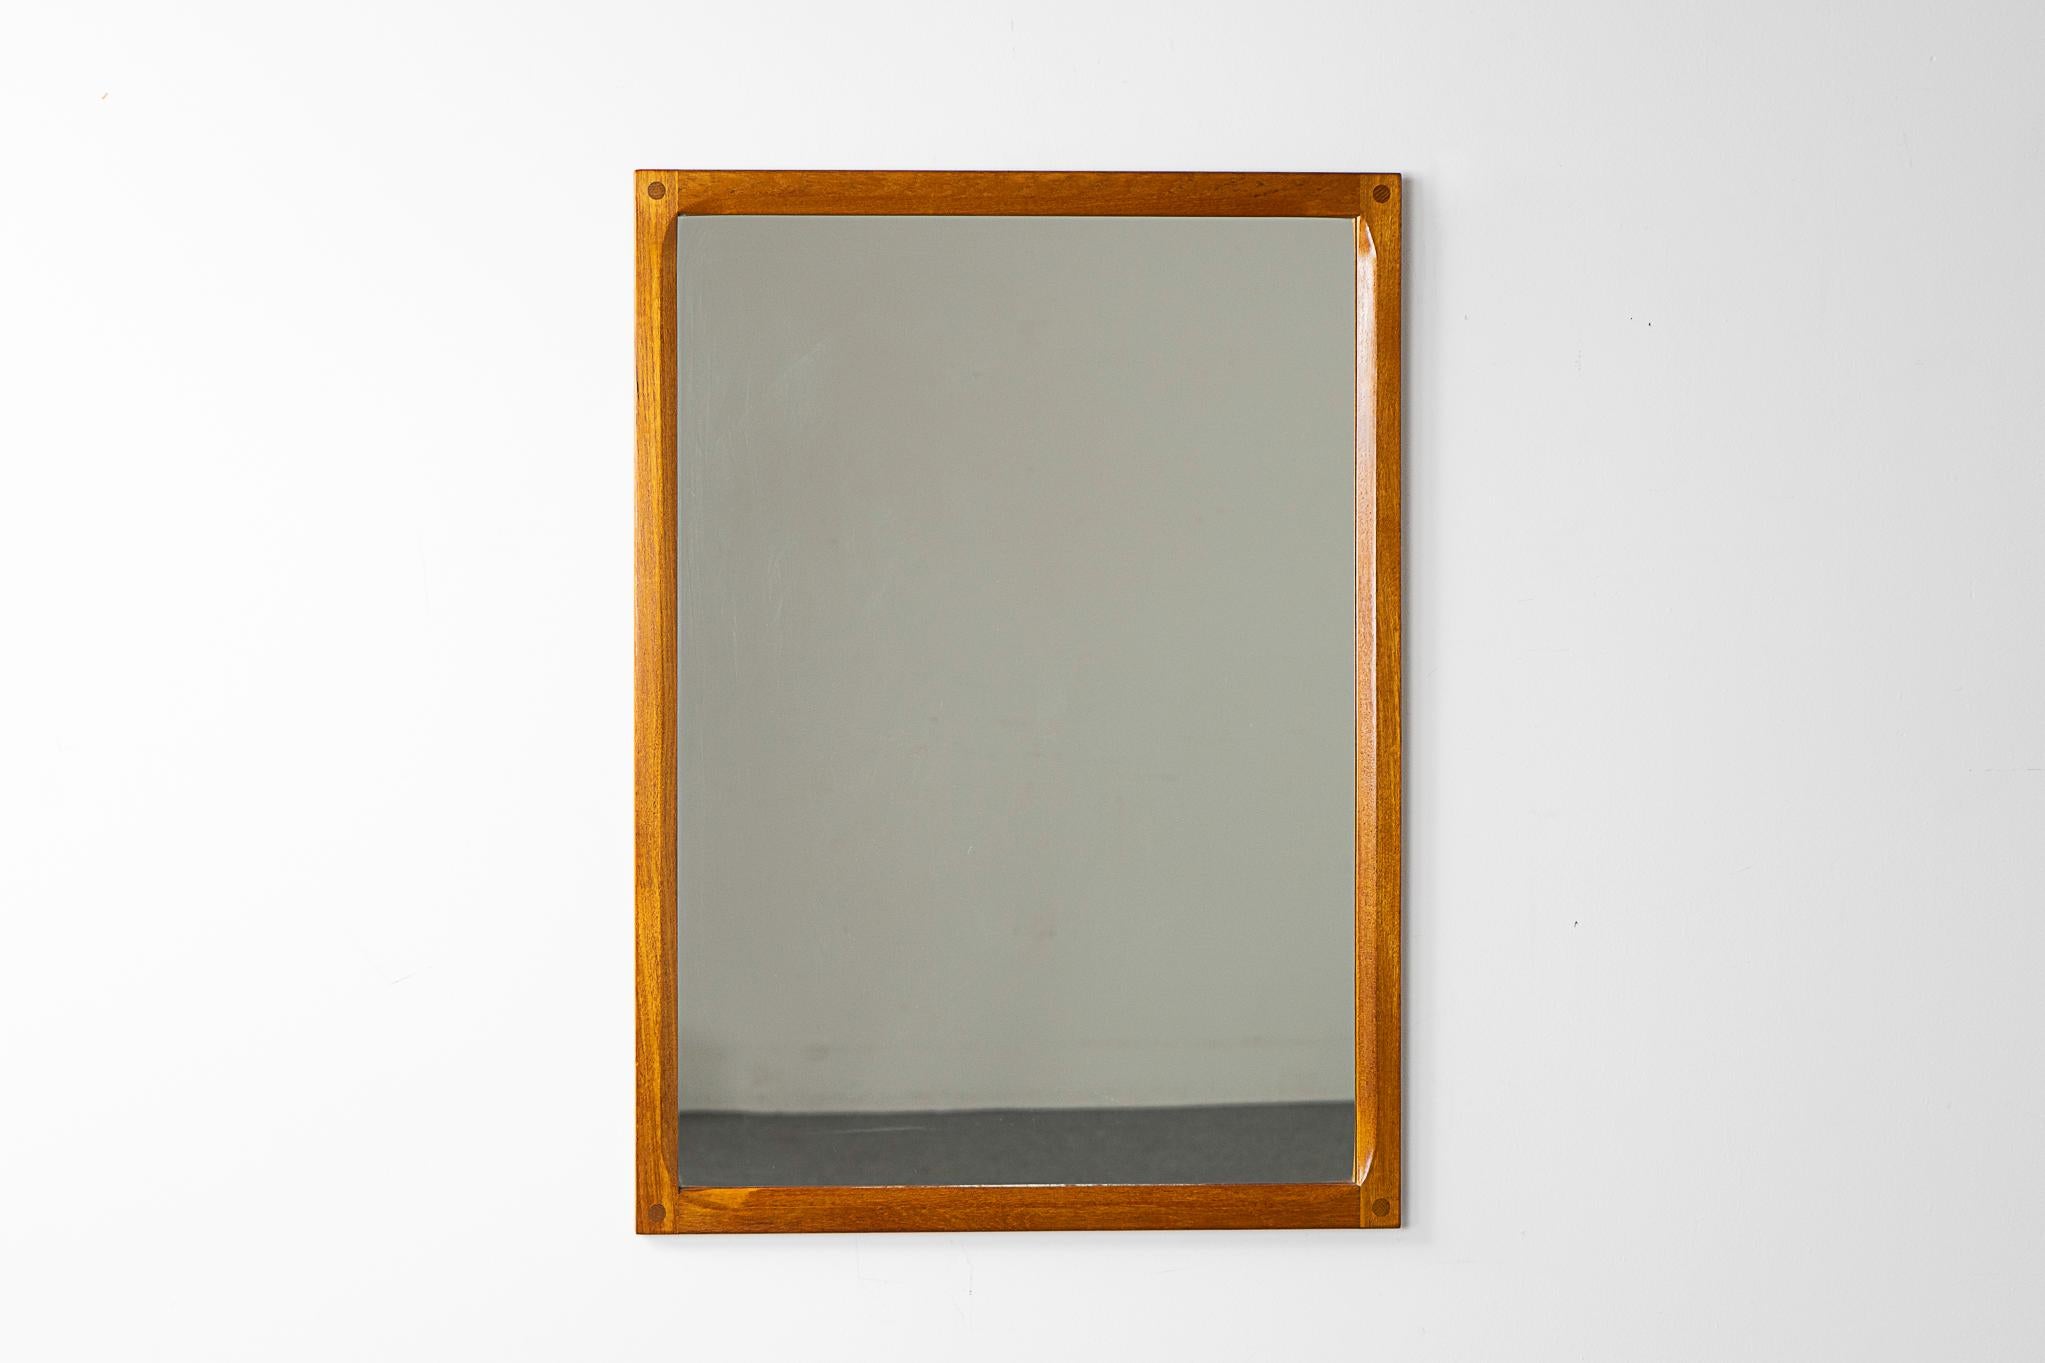 Teak mid-century mirror by Kai Kristiansen, circa 1960's. Solid teak frame with lovely graining, beautiful joinery and beveled inner edges. Quality!

Please inquire for remote and international shipping rates.